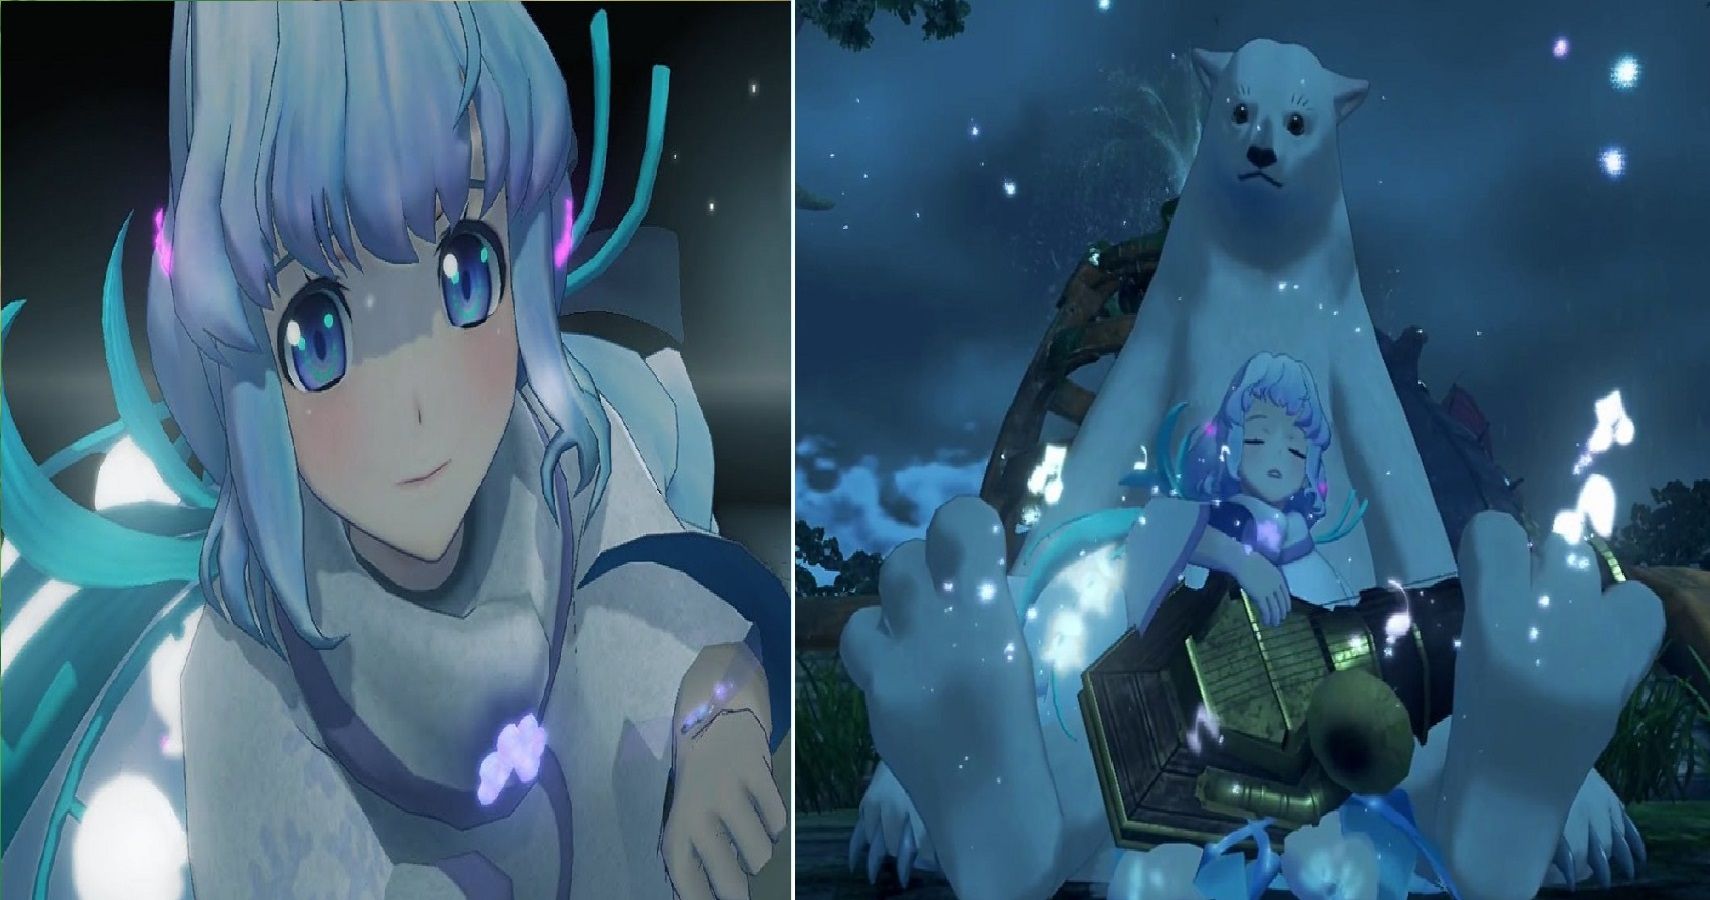 Xenoblade Chronicles 2: Two images of Ursula and Beary